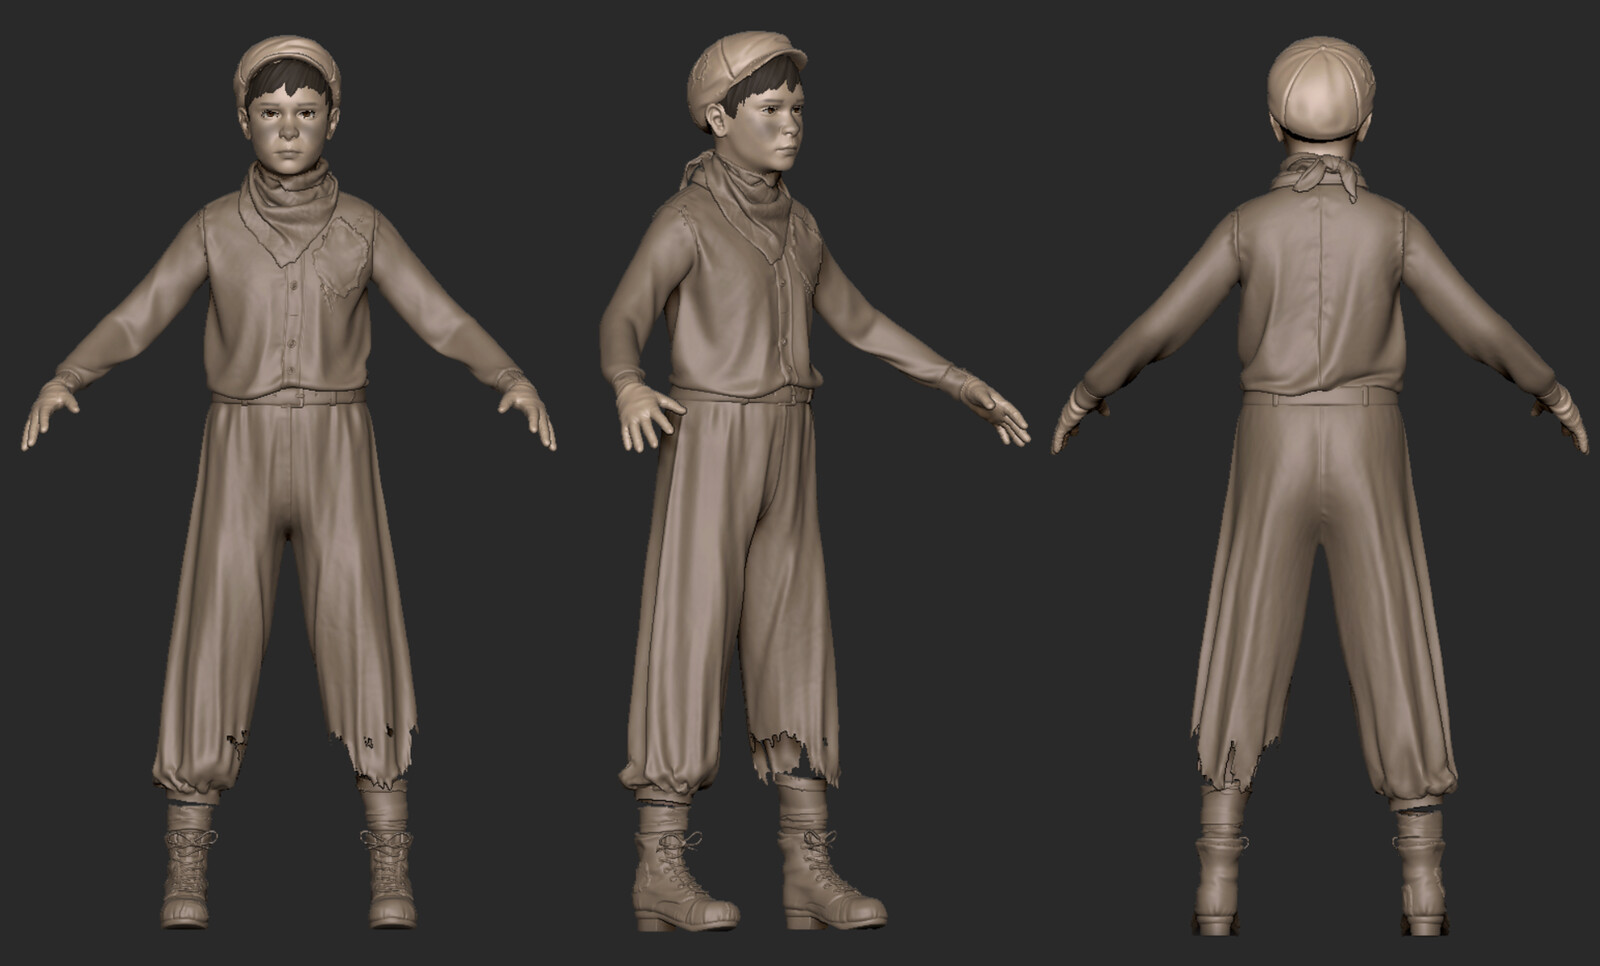 Delve Children Ghosts
Responsible for concepting and hi-poly sculpting.